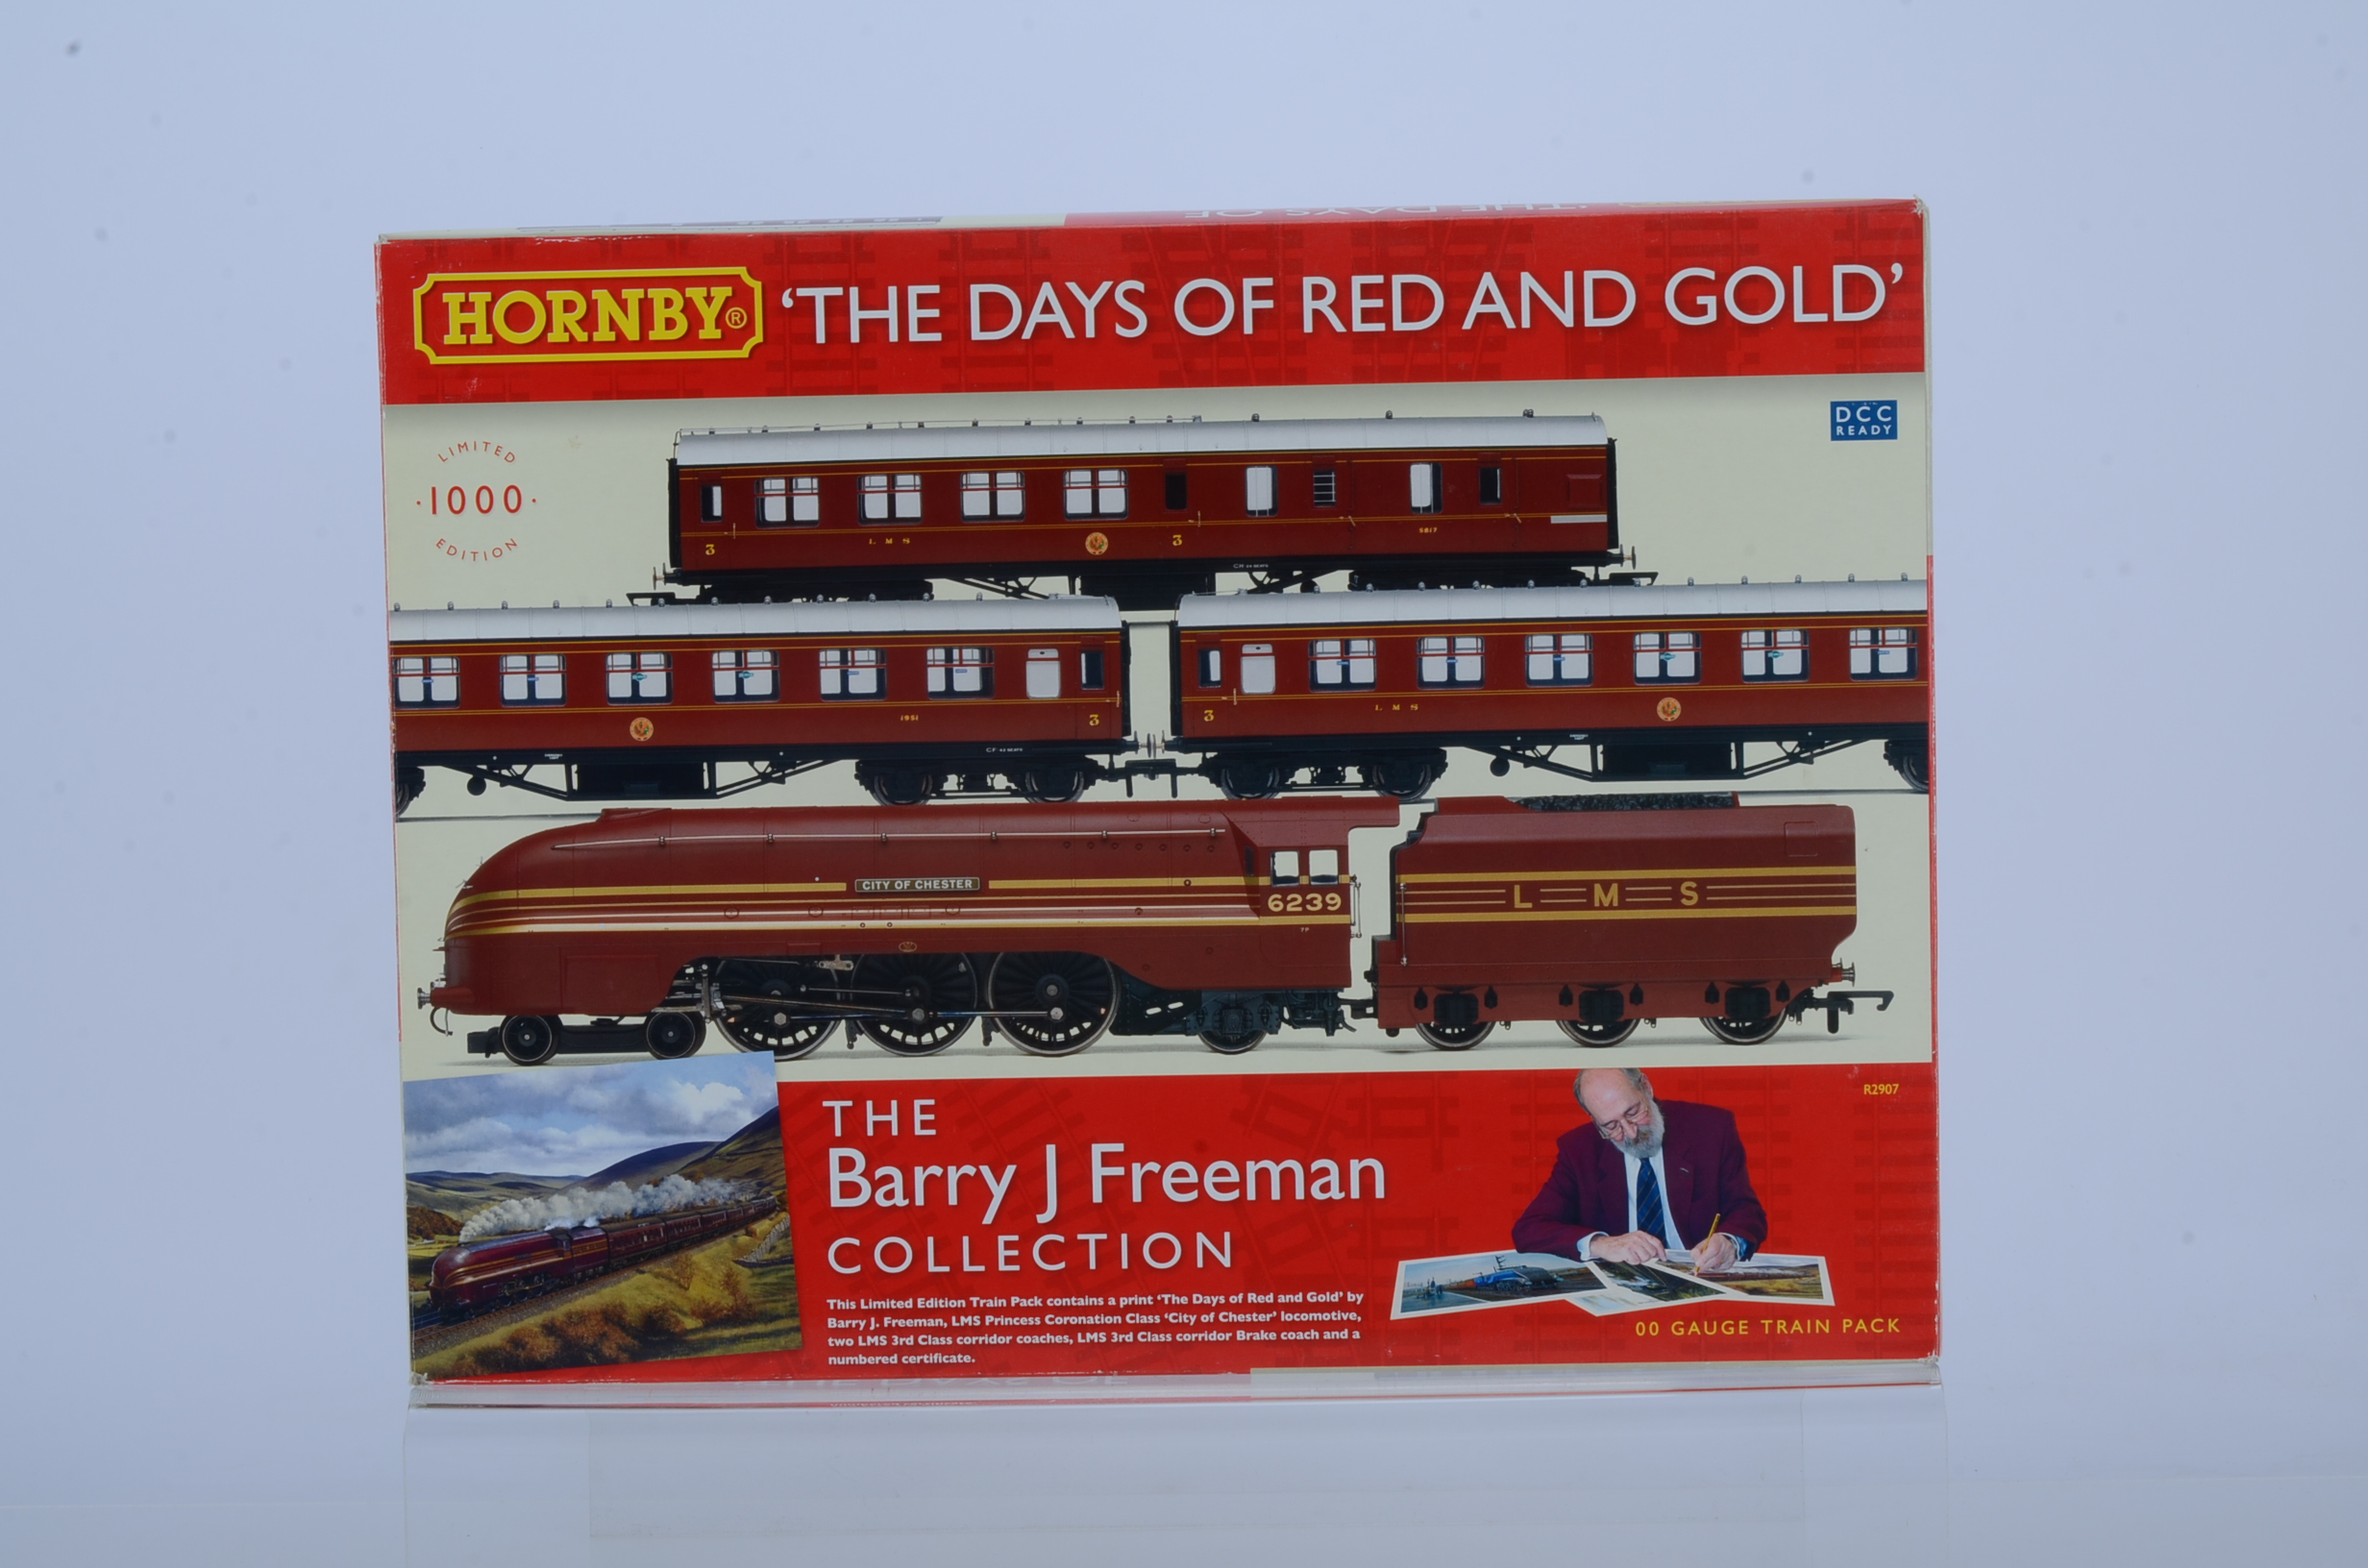 Hornby China OO Gauge Barry J Freeman Collection The Days of Red and Gold, a boxed limited edition